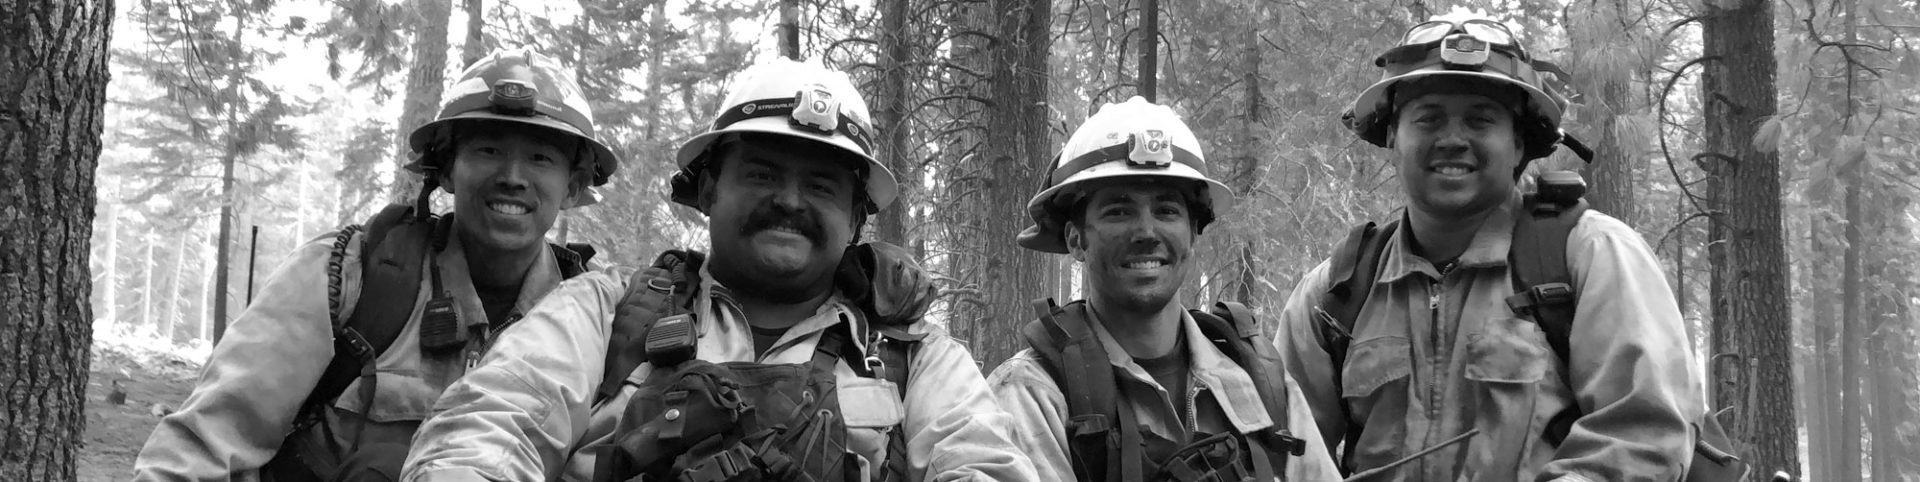 Header four fire fighters posed